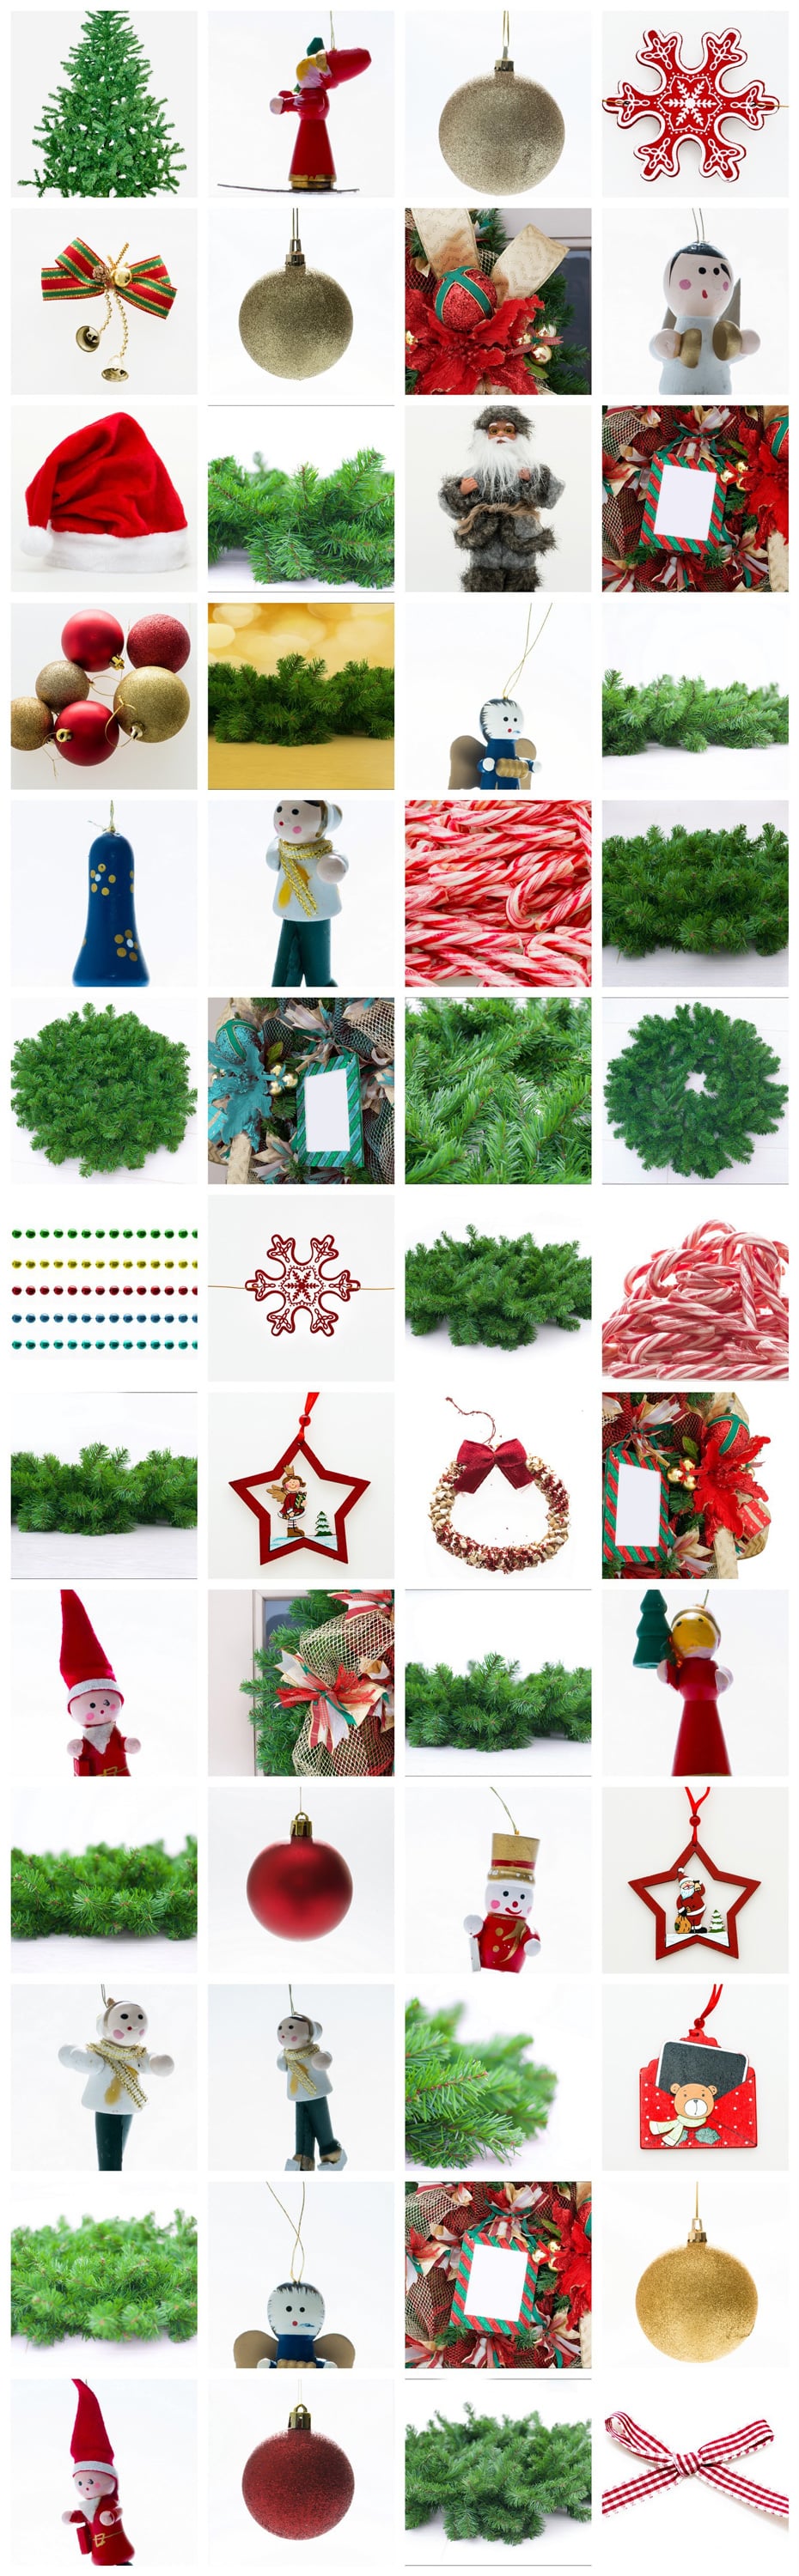 Get 150+ Christmas Stock Photos with Extended License for only $9